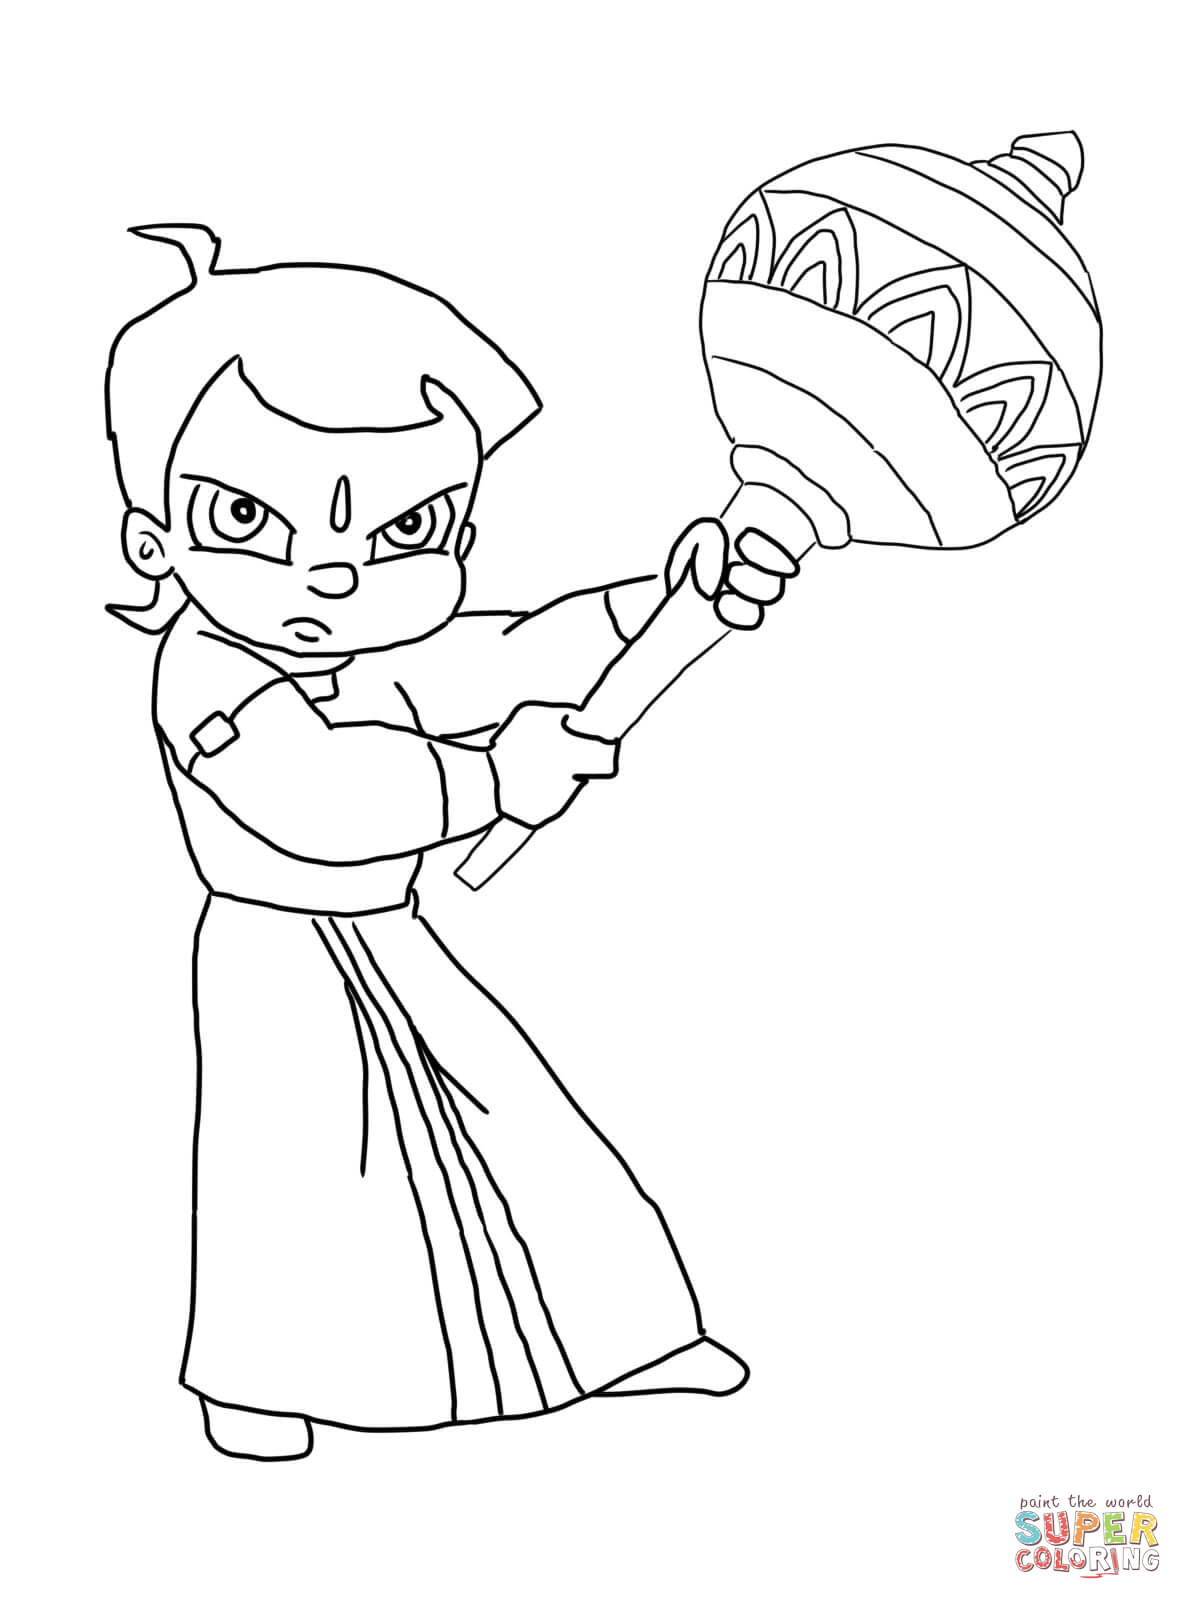 Chota Bheem coloring pages | Free Coloring Pages